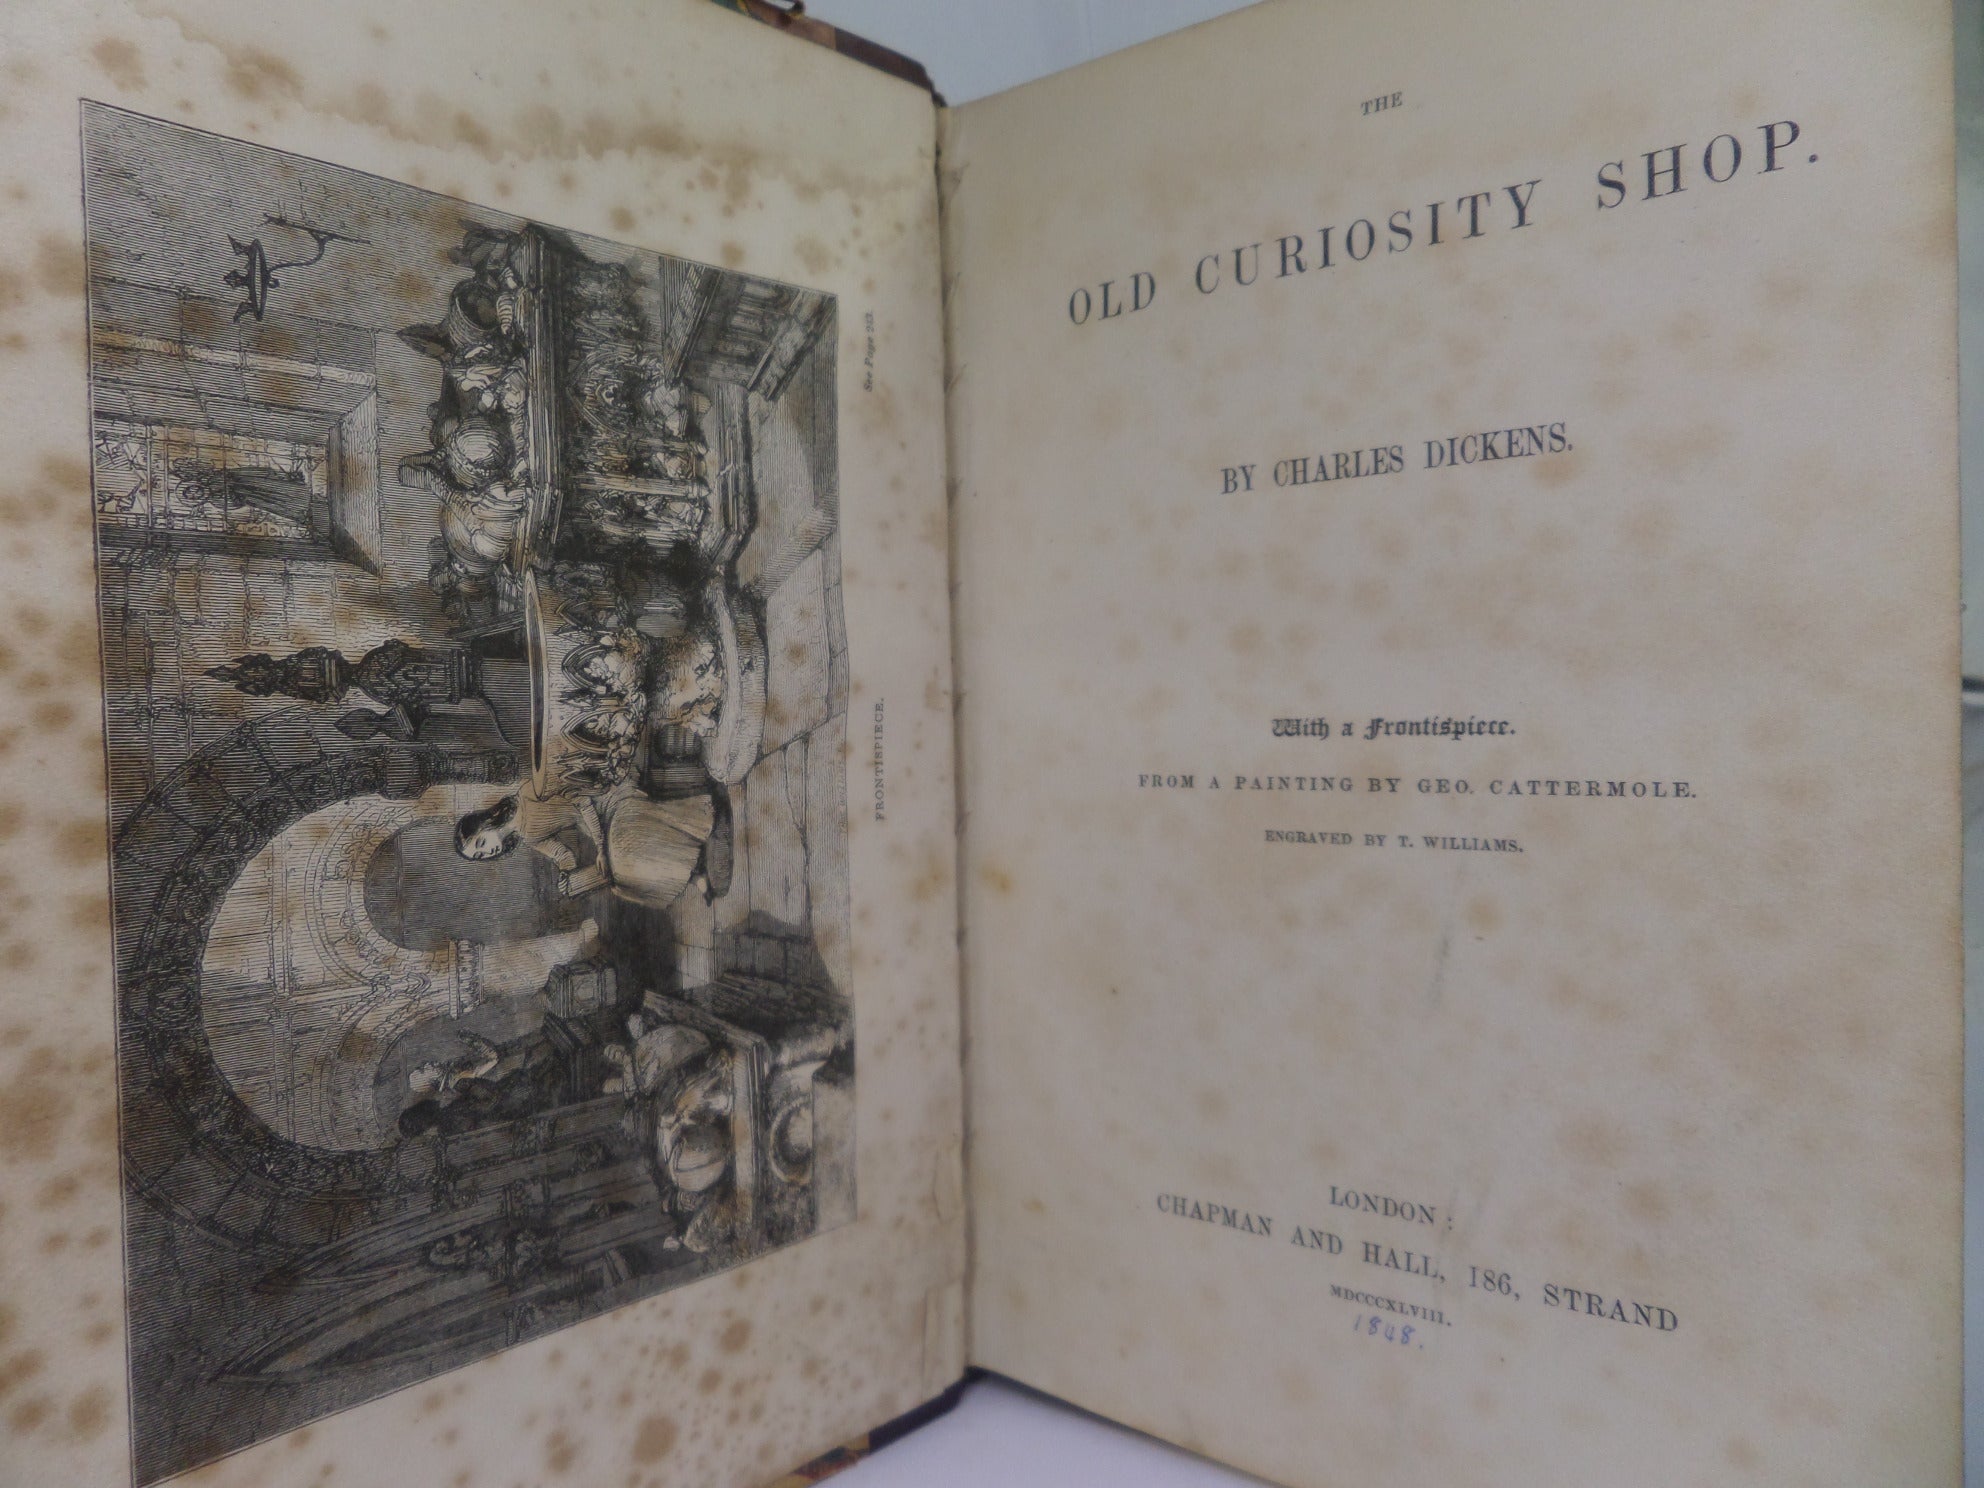 THE OLD CURIOSITY SHOP BY CHARLES DICKENS 1848 LEATHER BINDING